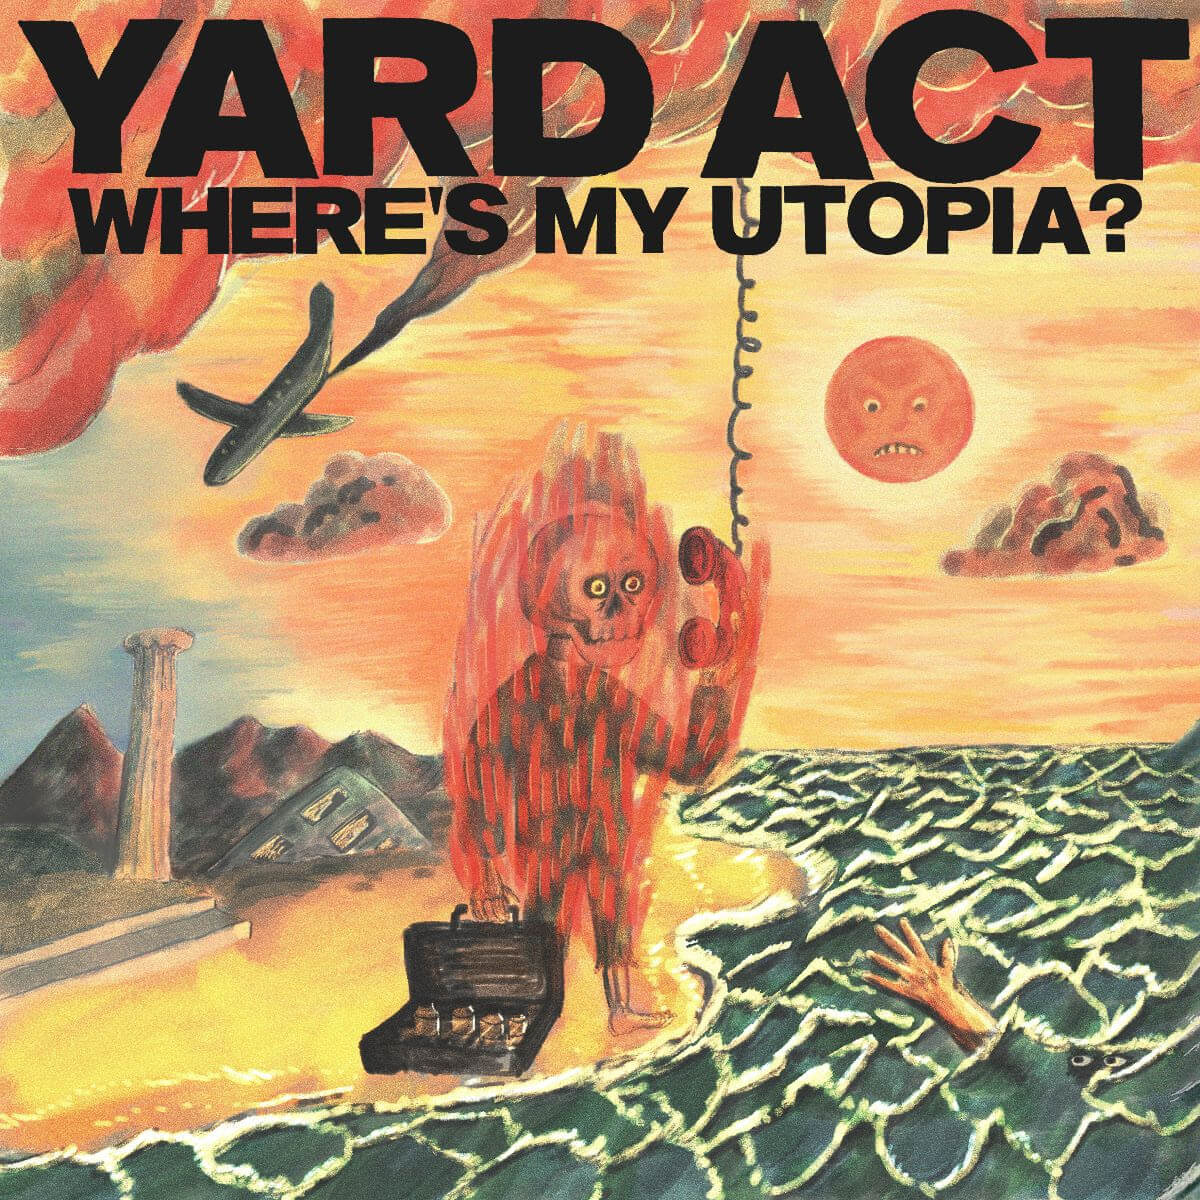 Where's My Utopia? by Yard Act album review by David Saxum for Northern Transmissions. The UK band's LP drops on March 1st via Republic